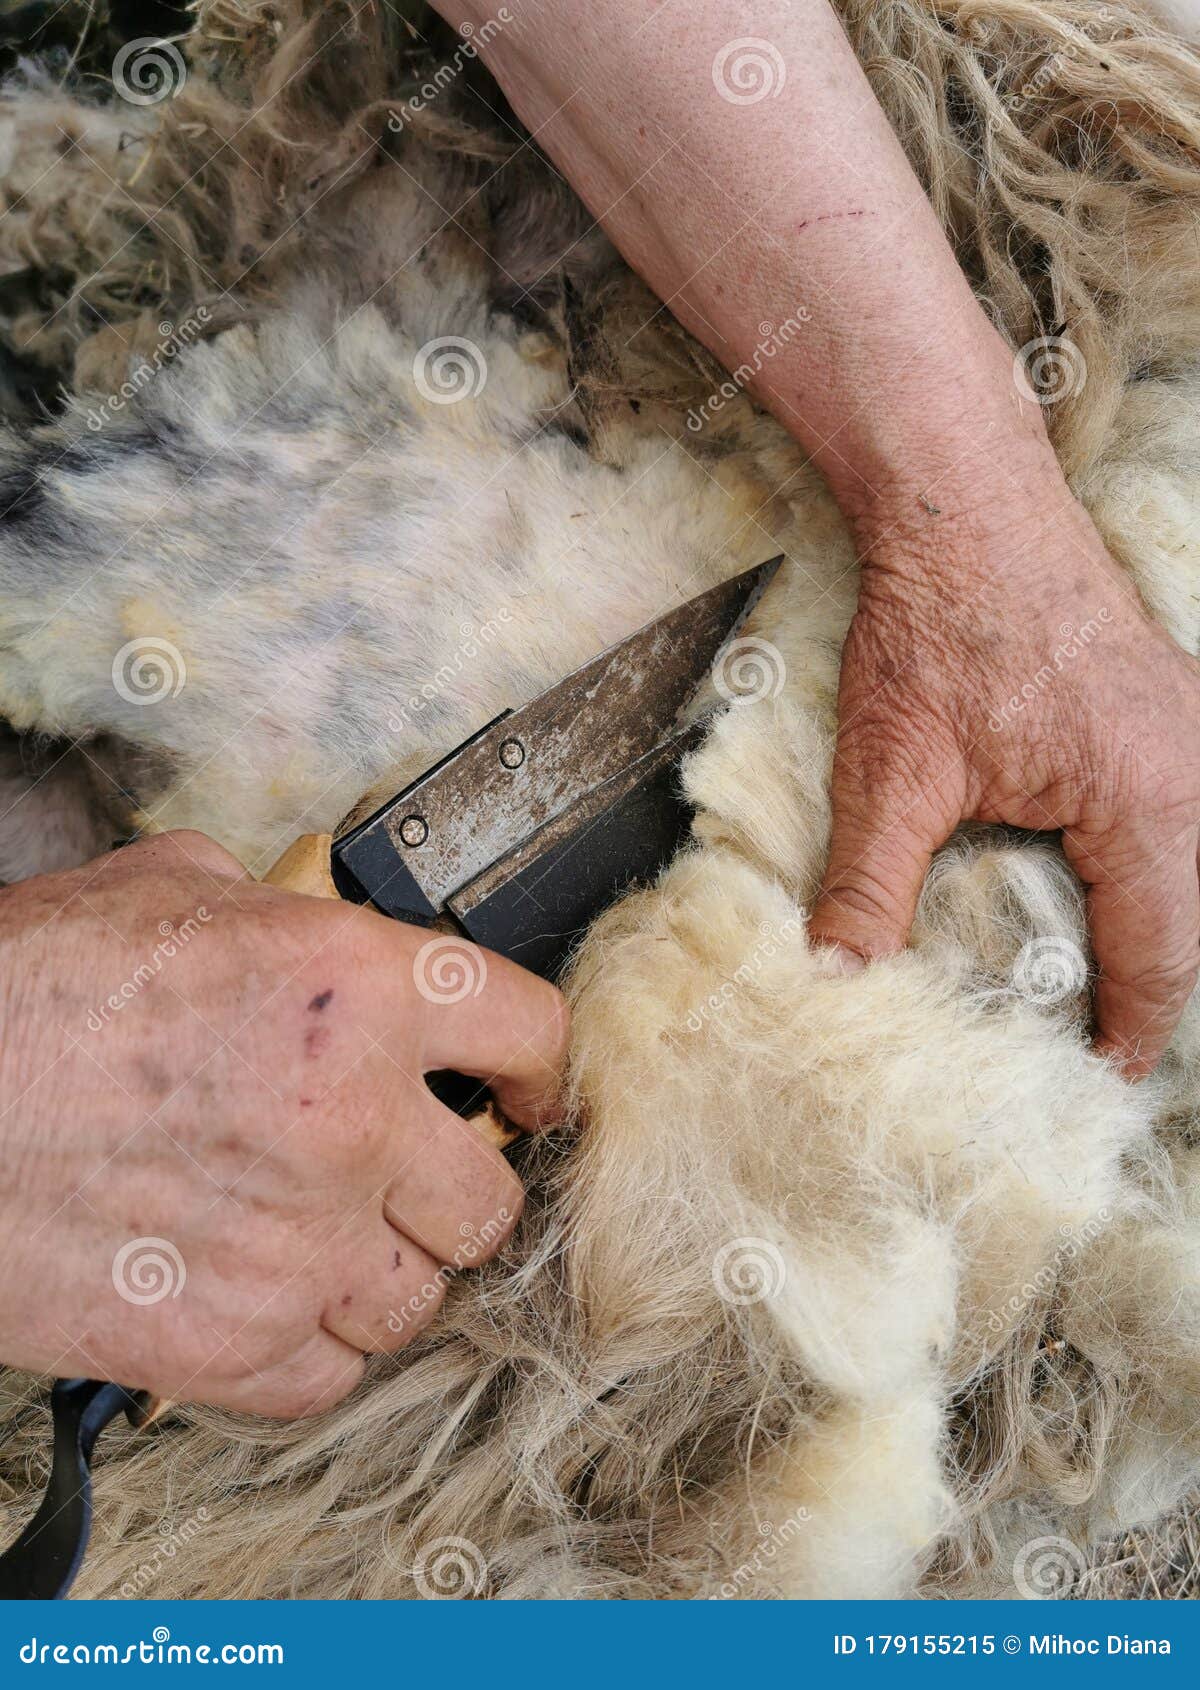 Sheep Shearing In The Process Stock Image Image Of Sheep Country